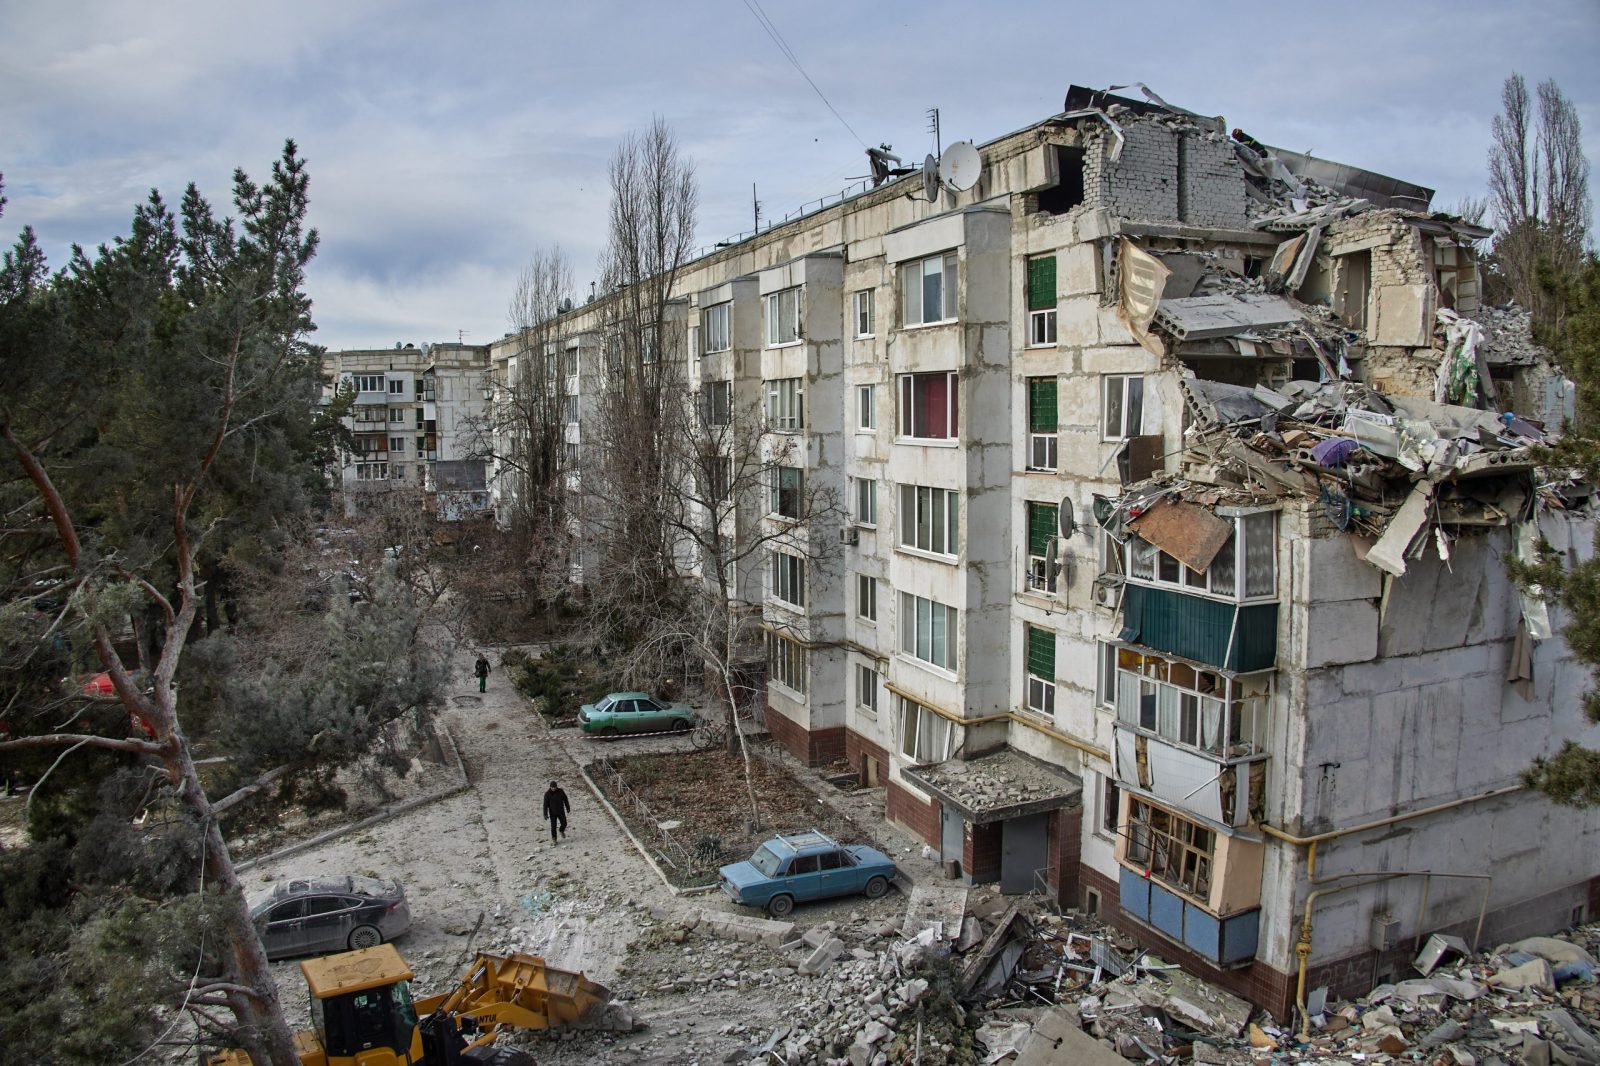 epa10344318 Ukrainian rescuers work on a building that was destroyed during night shelling in the village of Kluhyno-Bashkyrivka near Chuhuiv, Kharkiv region, Ukraine, 02 December 2022. Kharkiv and surrounding areas have been the target of heavy shelling since February 2022, when Russian troops entered Ukraine starting a conflict that has provoked destruction and a humanitarian crisis. At the beginning of September, the Ukrainian army pushed Russian forces from occupied territory northeast of the country in counterattacks  EPA/SERGIY KOZLOV